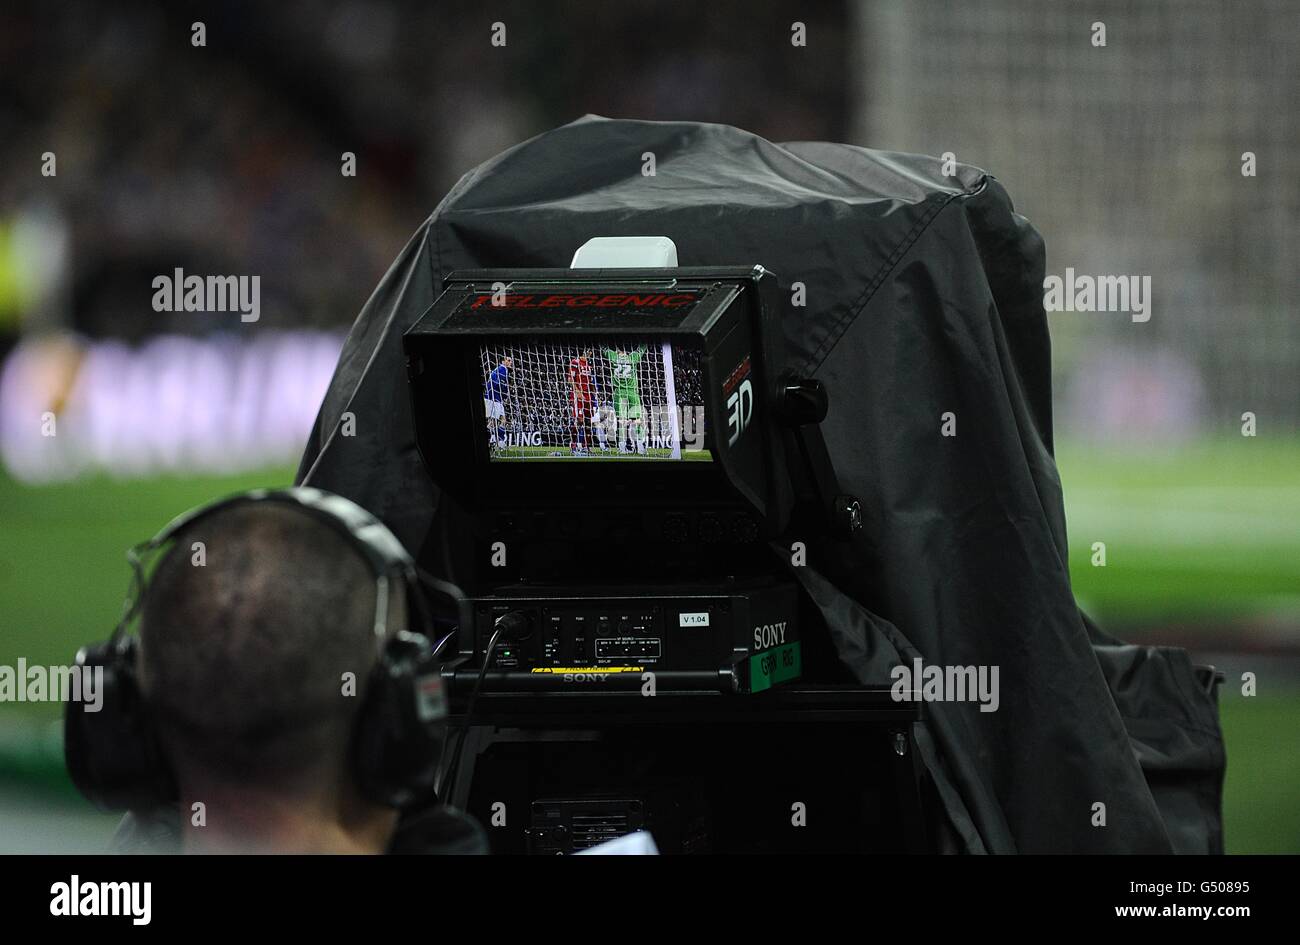 Soccer - Carling Cup - Final - Cardiff City v Liverpool - Wembley Stadium. A 3D Television camera captures the action Stock Photo